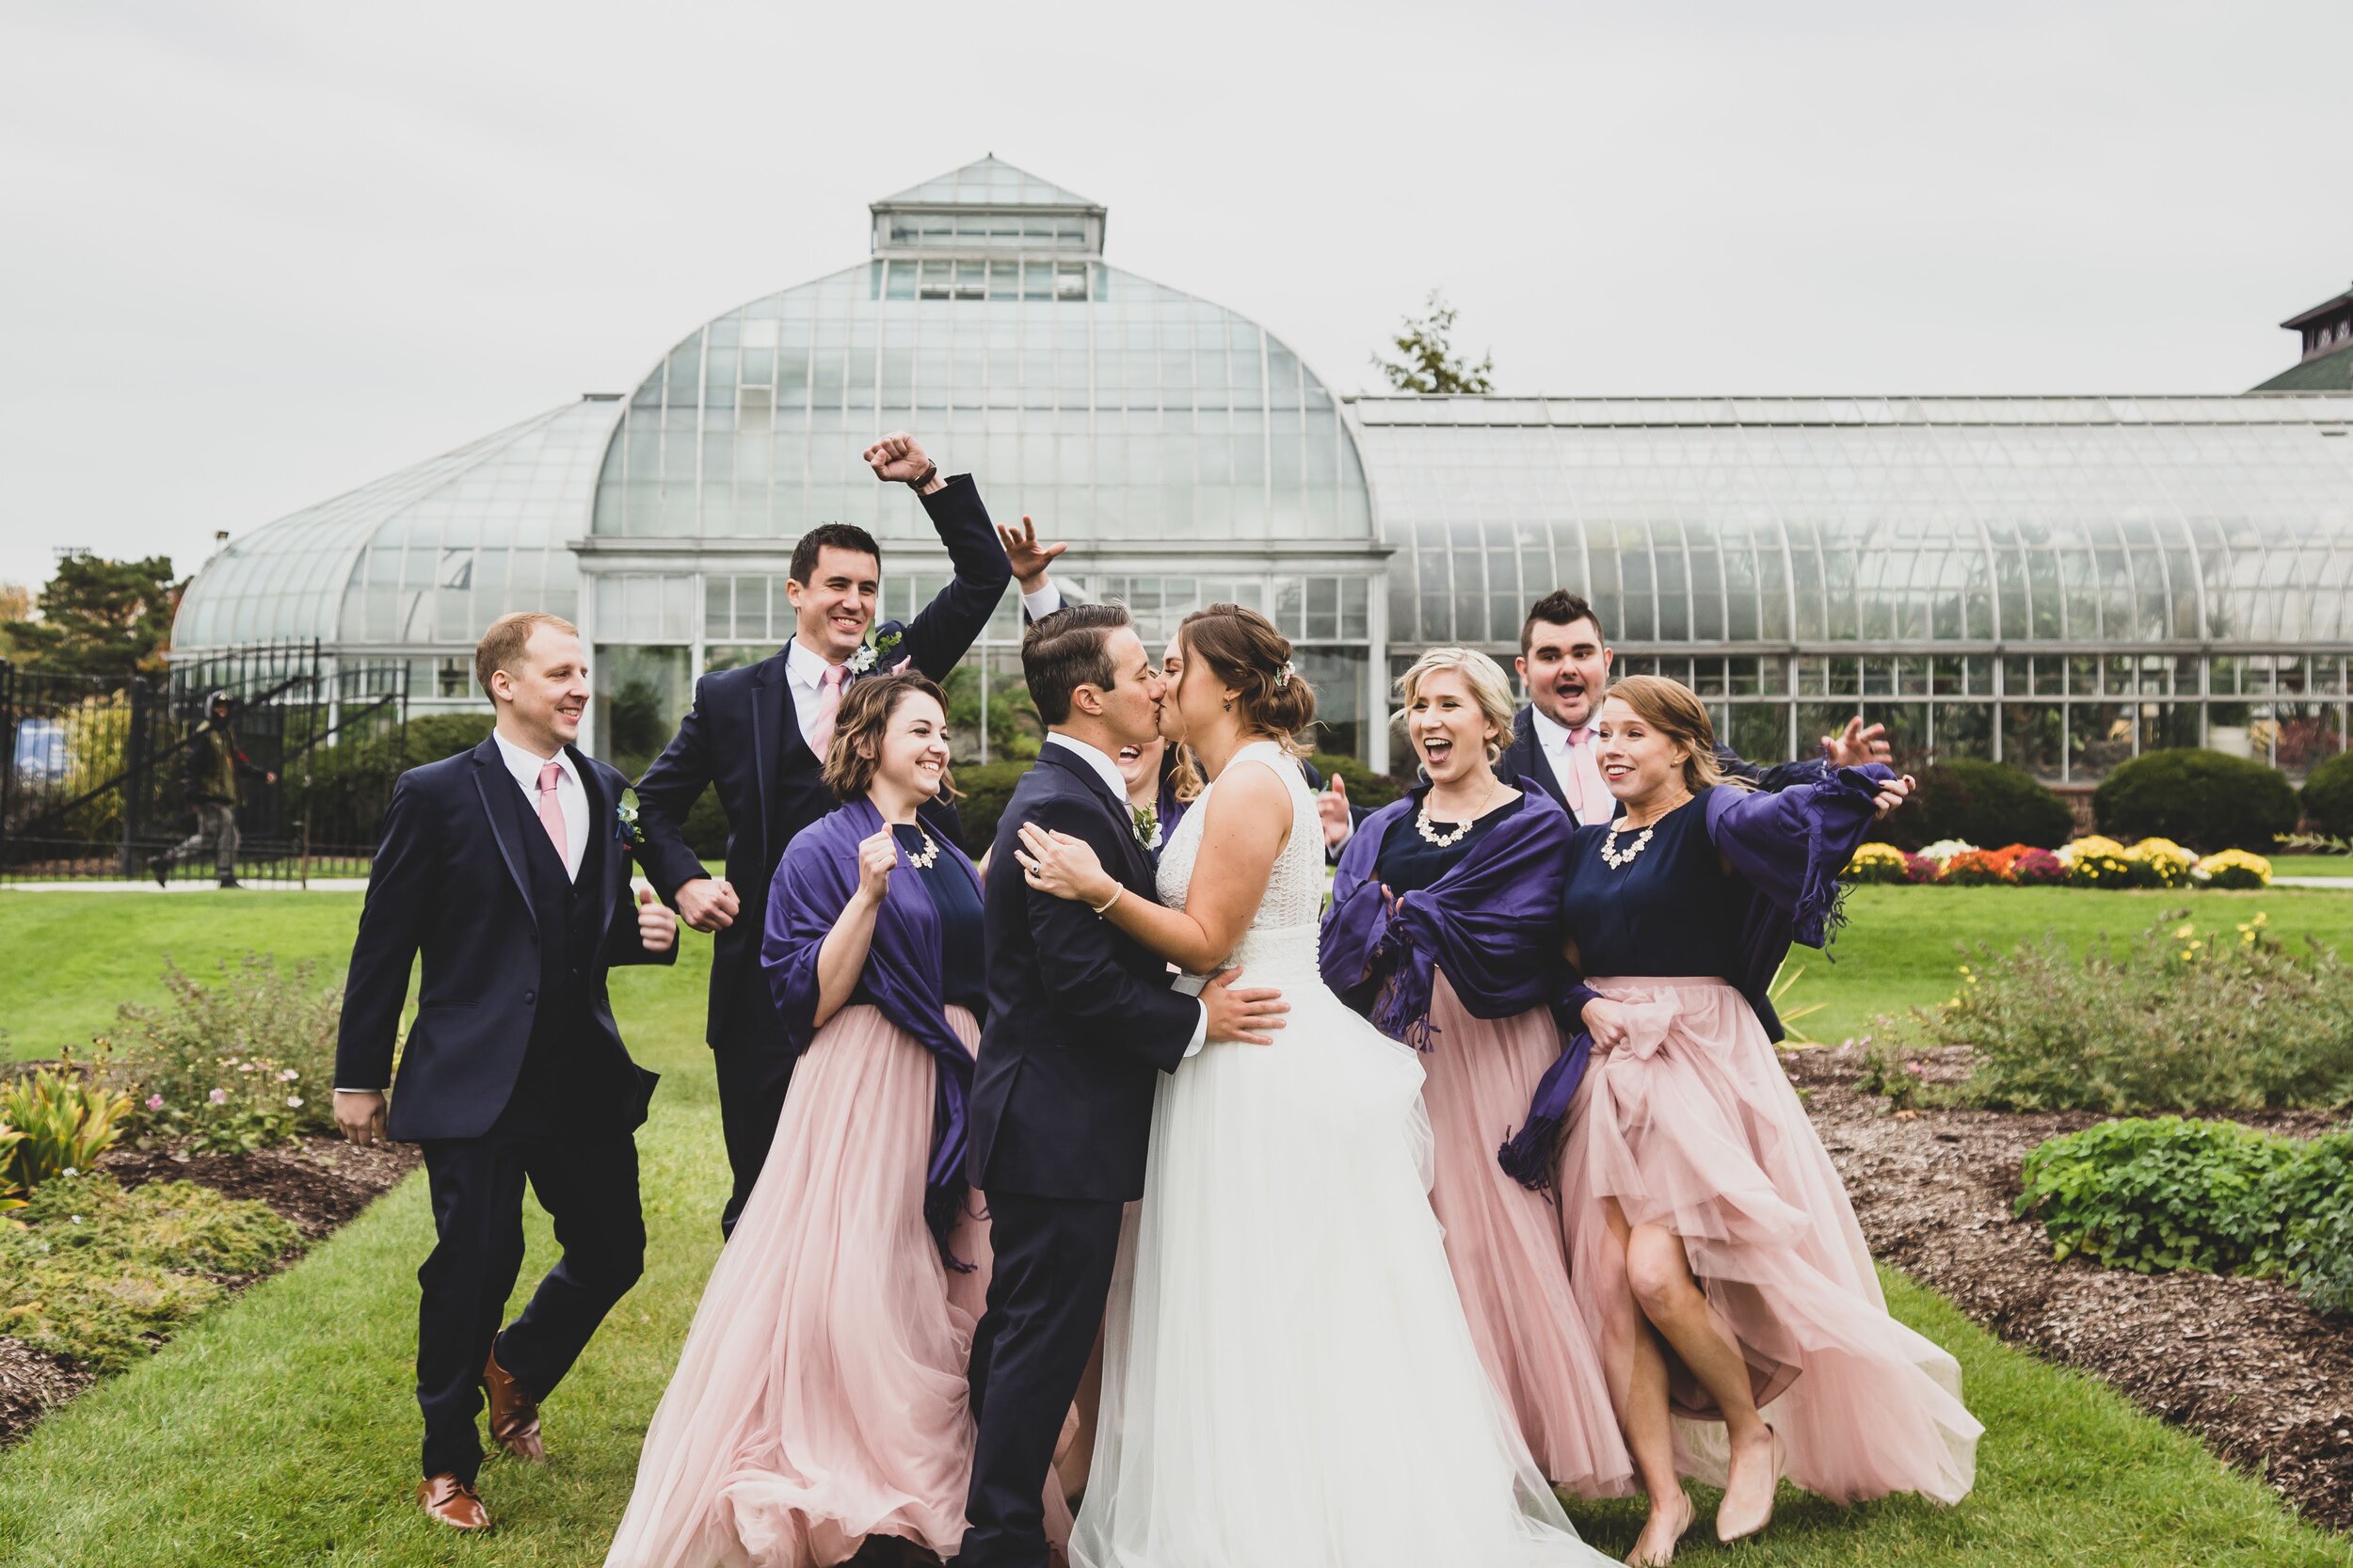 This bridal party had so much fun and were so supportive of Alyssa and Rob.